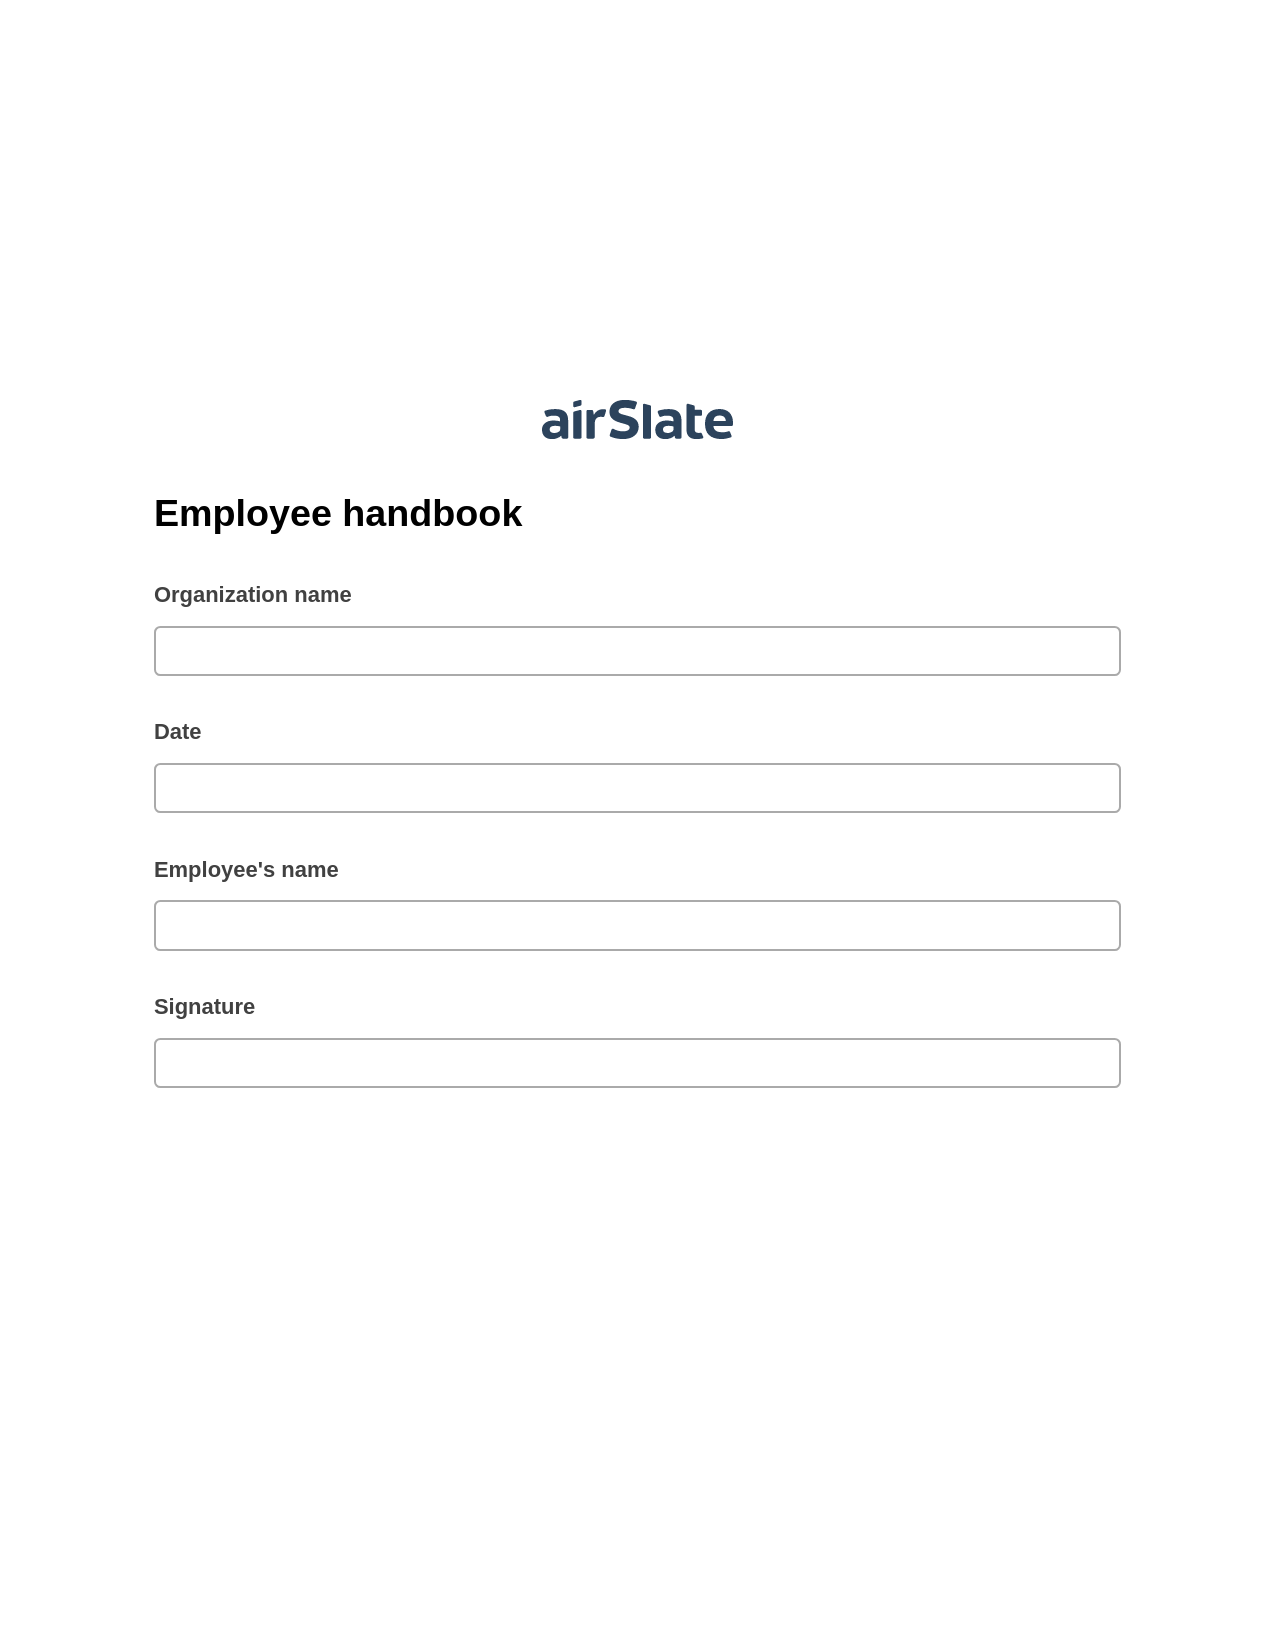 Employee handbook Pre-fill from Salesforce Record Bot, Add Tags to Slate Bot, Export to Formstack Documents Bot